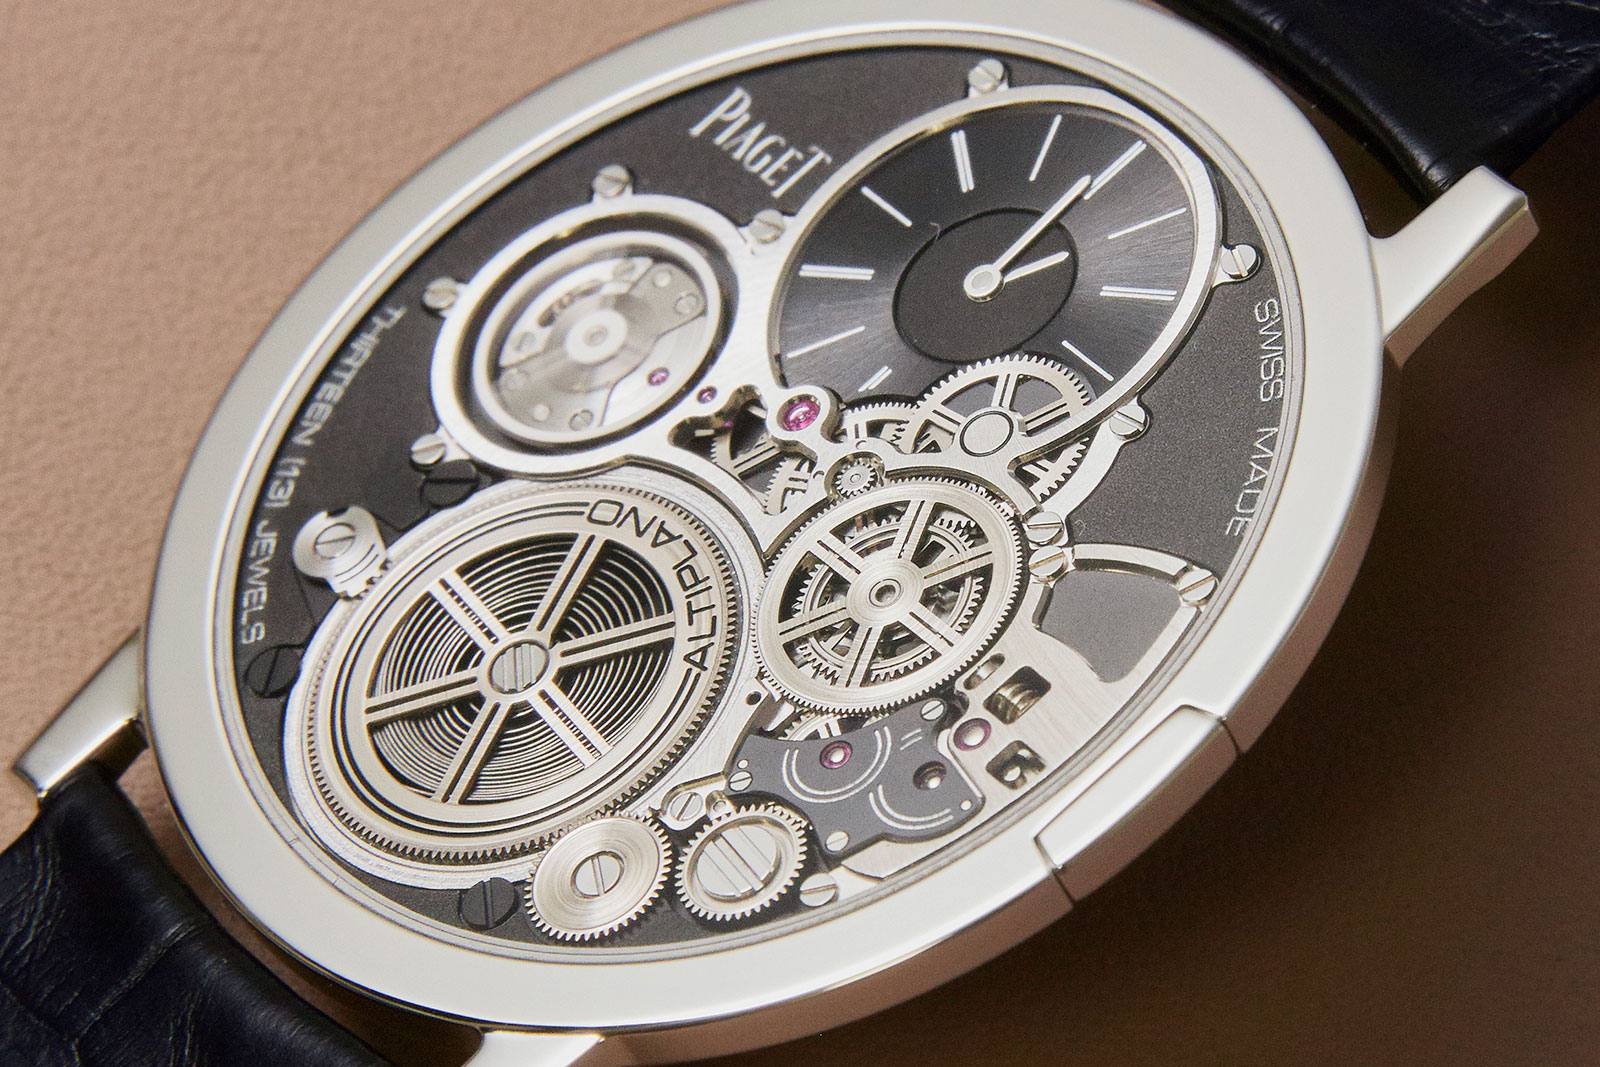 Piaget Altiplano Ultimate Concept watch 4